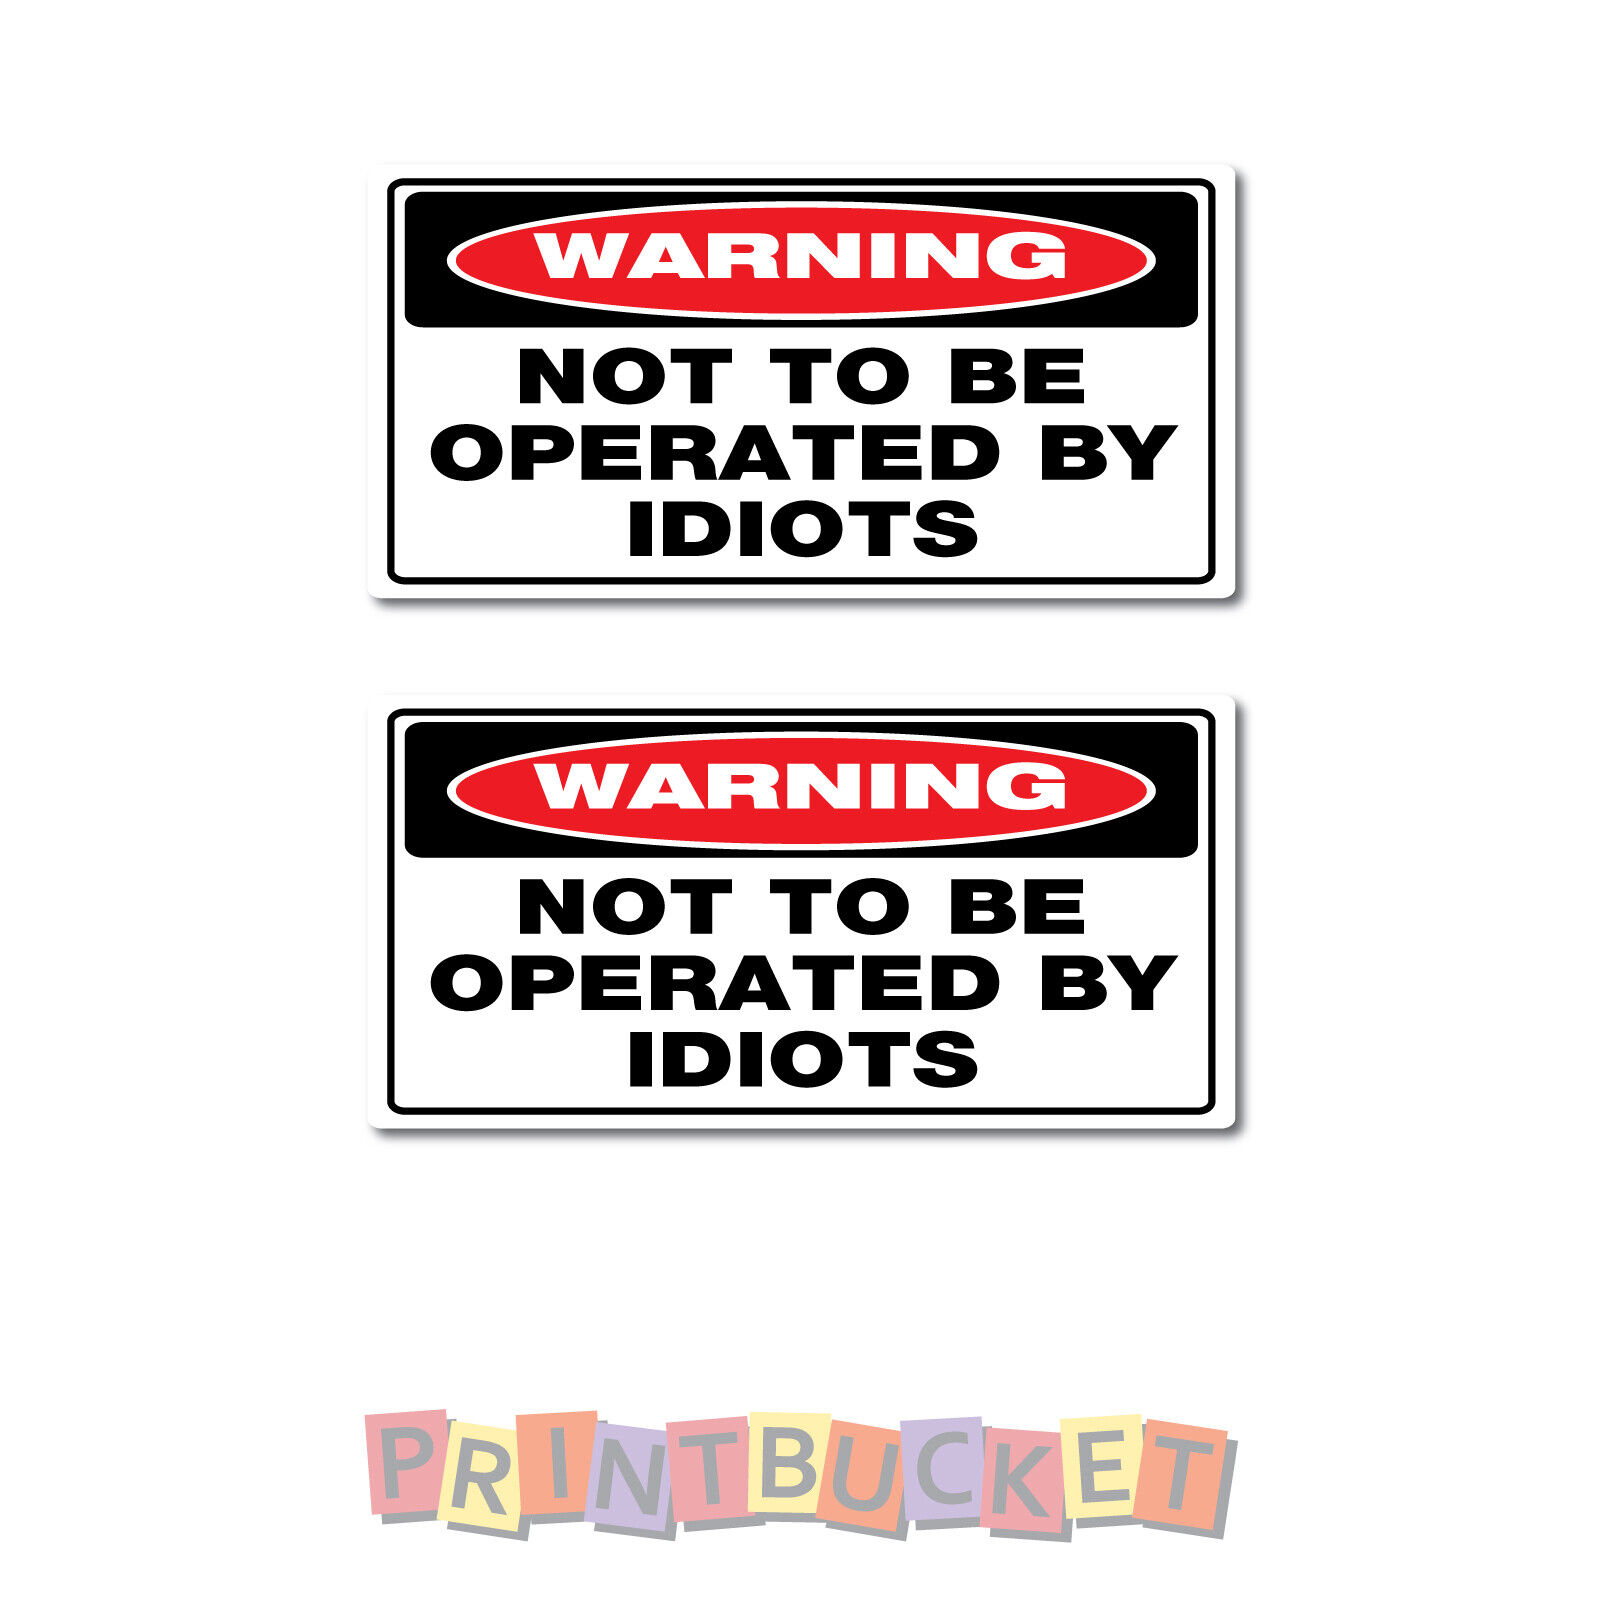 Not to be operated by idiots stickers 50mm h - 2 pack water/fade proof vinyl 